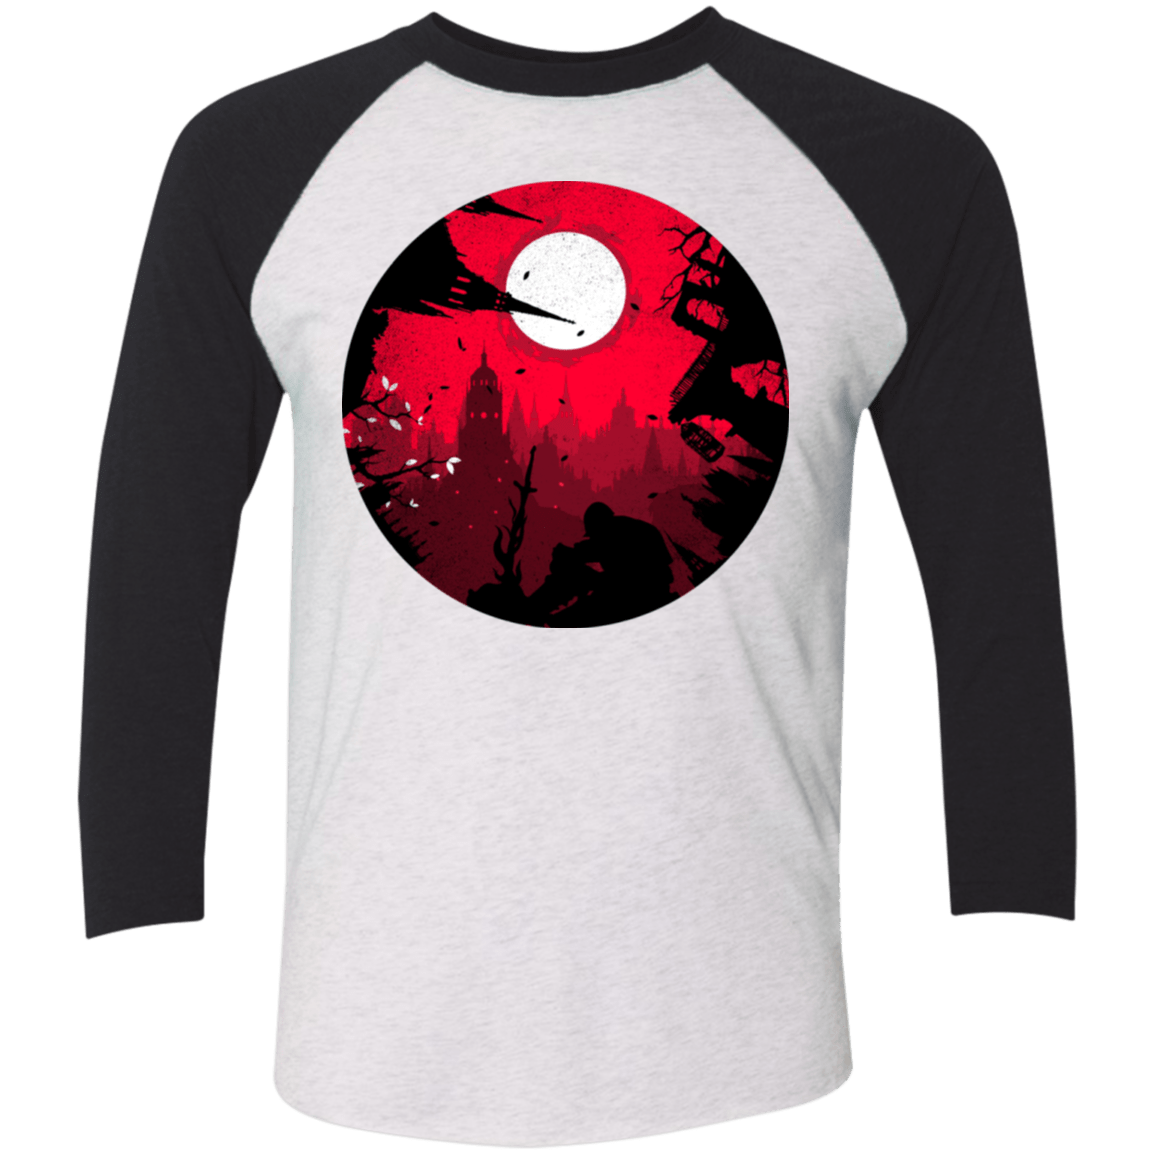 T-Shirts Heather White/Vintage Black / X-Small Embrace the Darkness Men's Triblend 3/4 Sleeve